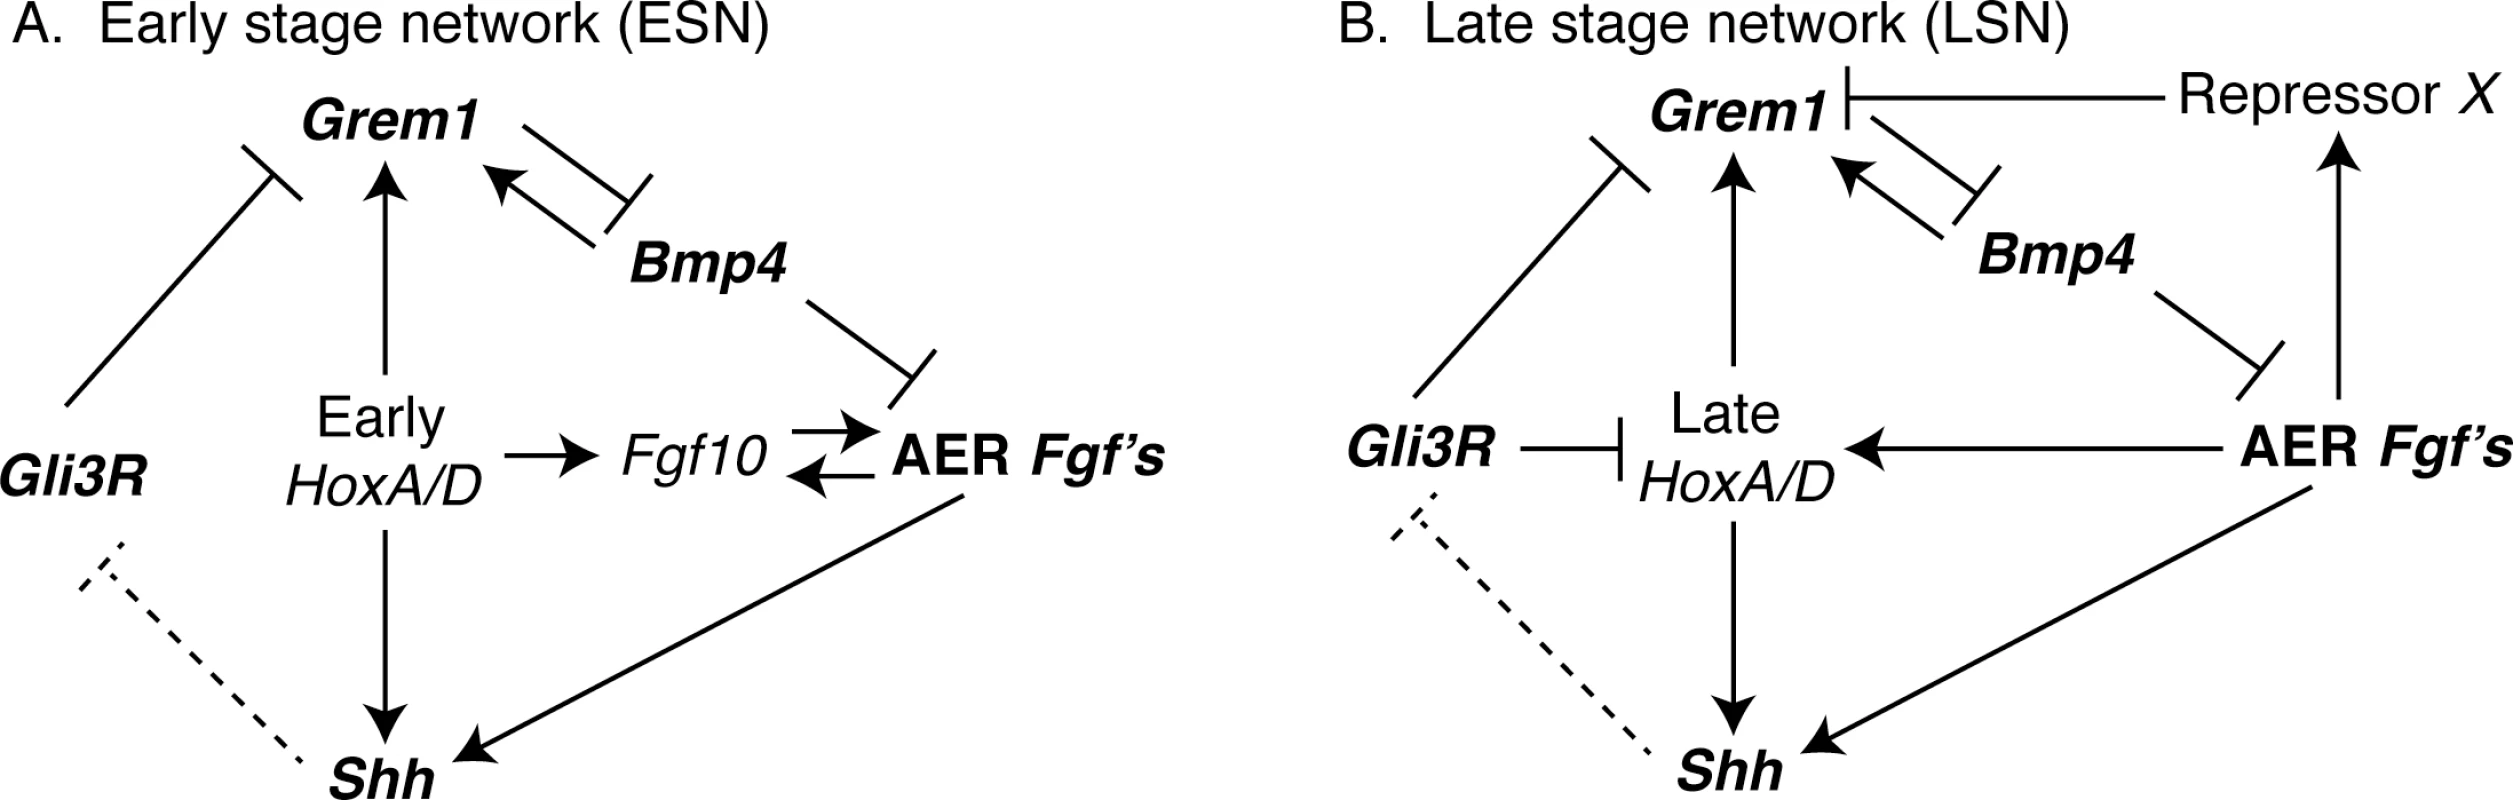 Interactions among genes in the (A) Early (ESN) and (B) Late (LSN) stage networks that were computationally modeled in this study are shown.